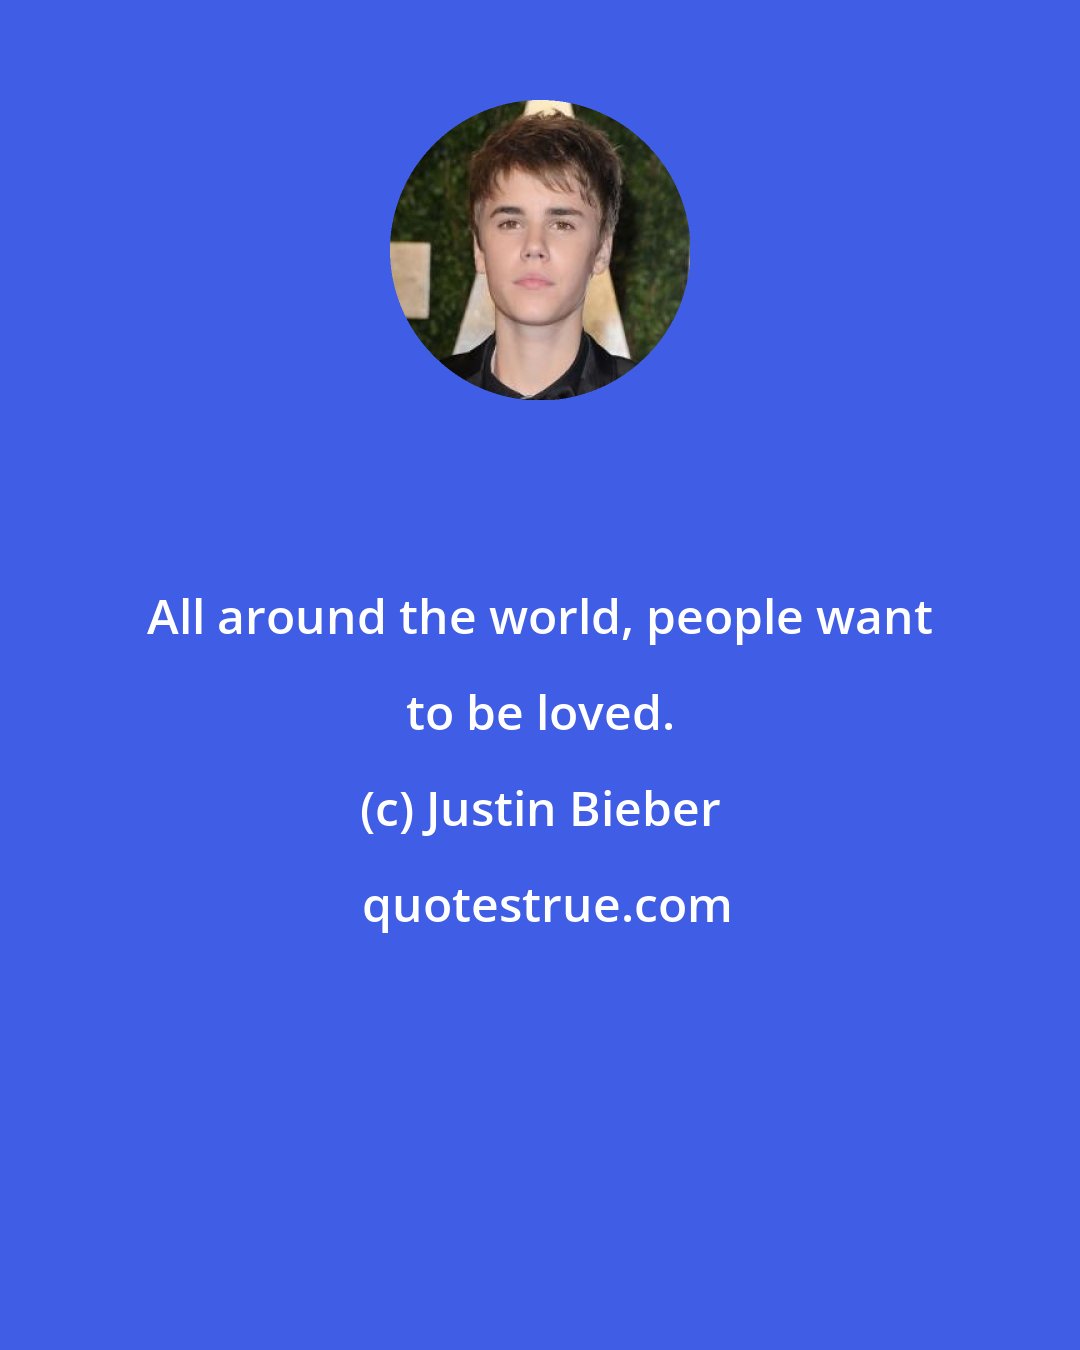 Justin Bieber: All around the world, people want to be loved.